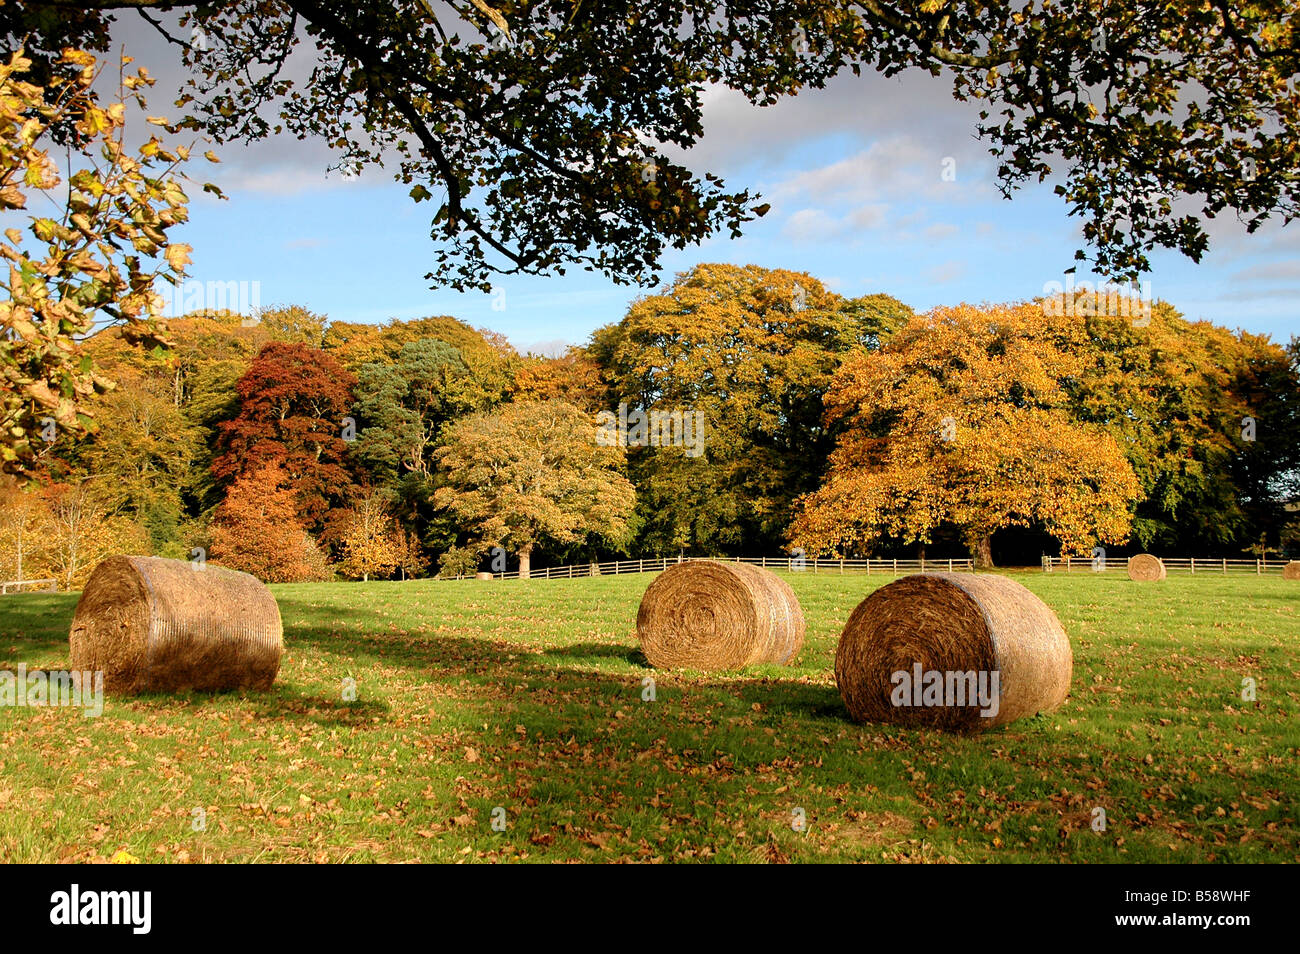 Hay bales lie in a field surrounded by autumnal trees. Stock Photo